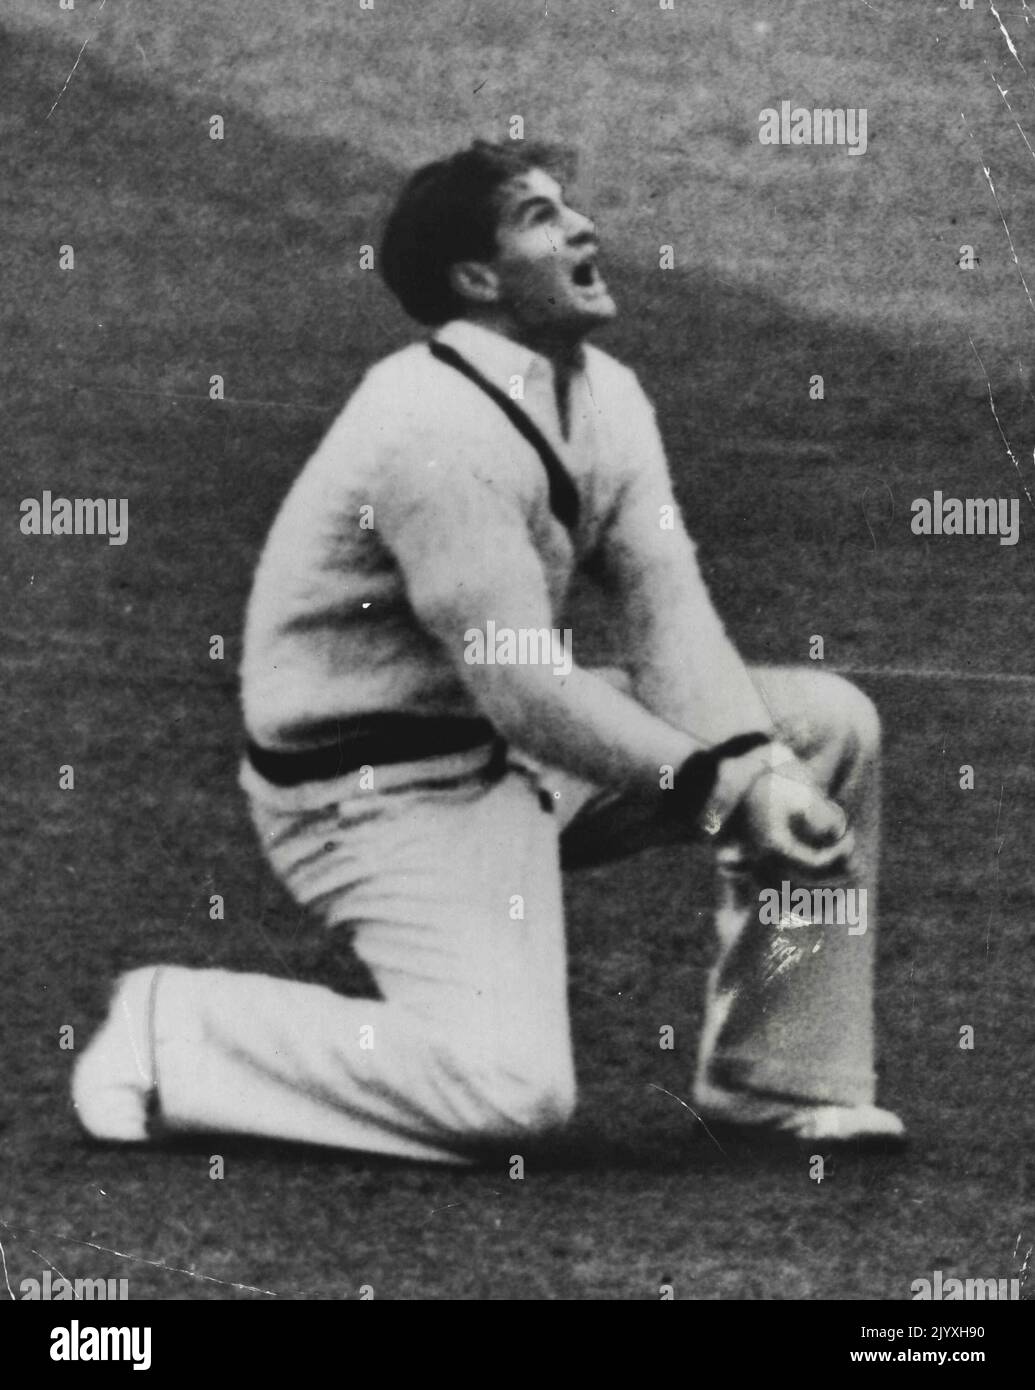 He's Out: Keith Miller's expression in this fine action shot left no doubt as to the success of his slip catch in the match against Cambridge recently. Colorful personality Keith Miller shows a schoolboys exuberance as he takes this smart catch in slips and appeals during the Cambridge match on the 1948 English tour. May 26, 1948. Stock Photo